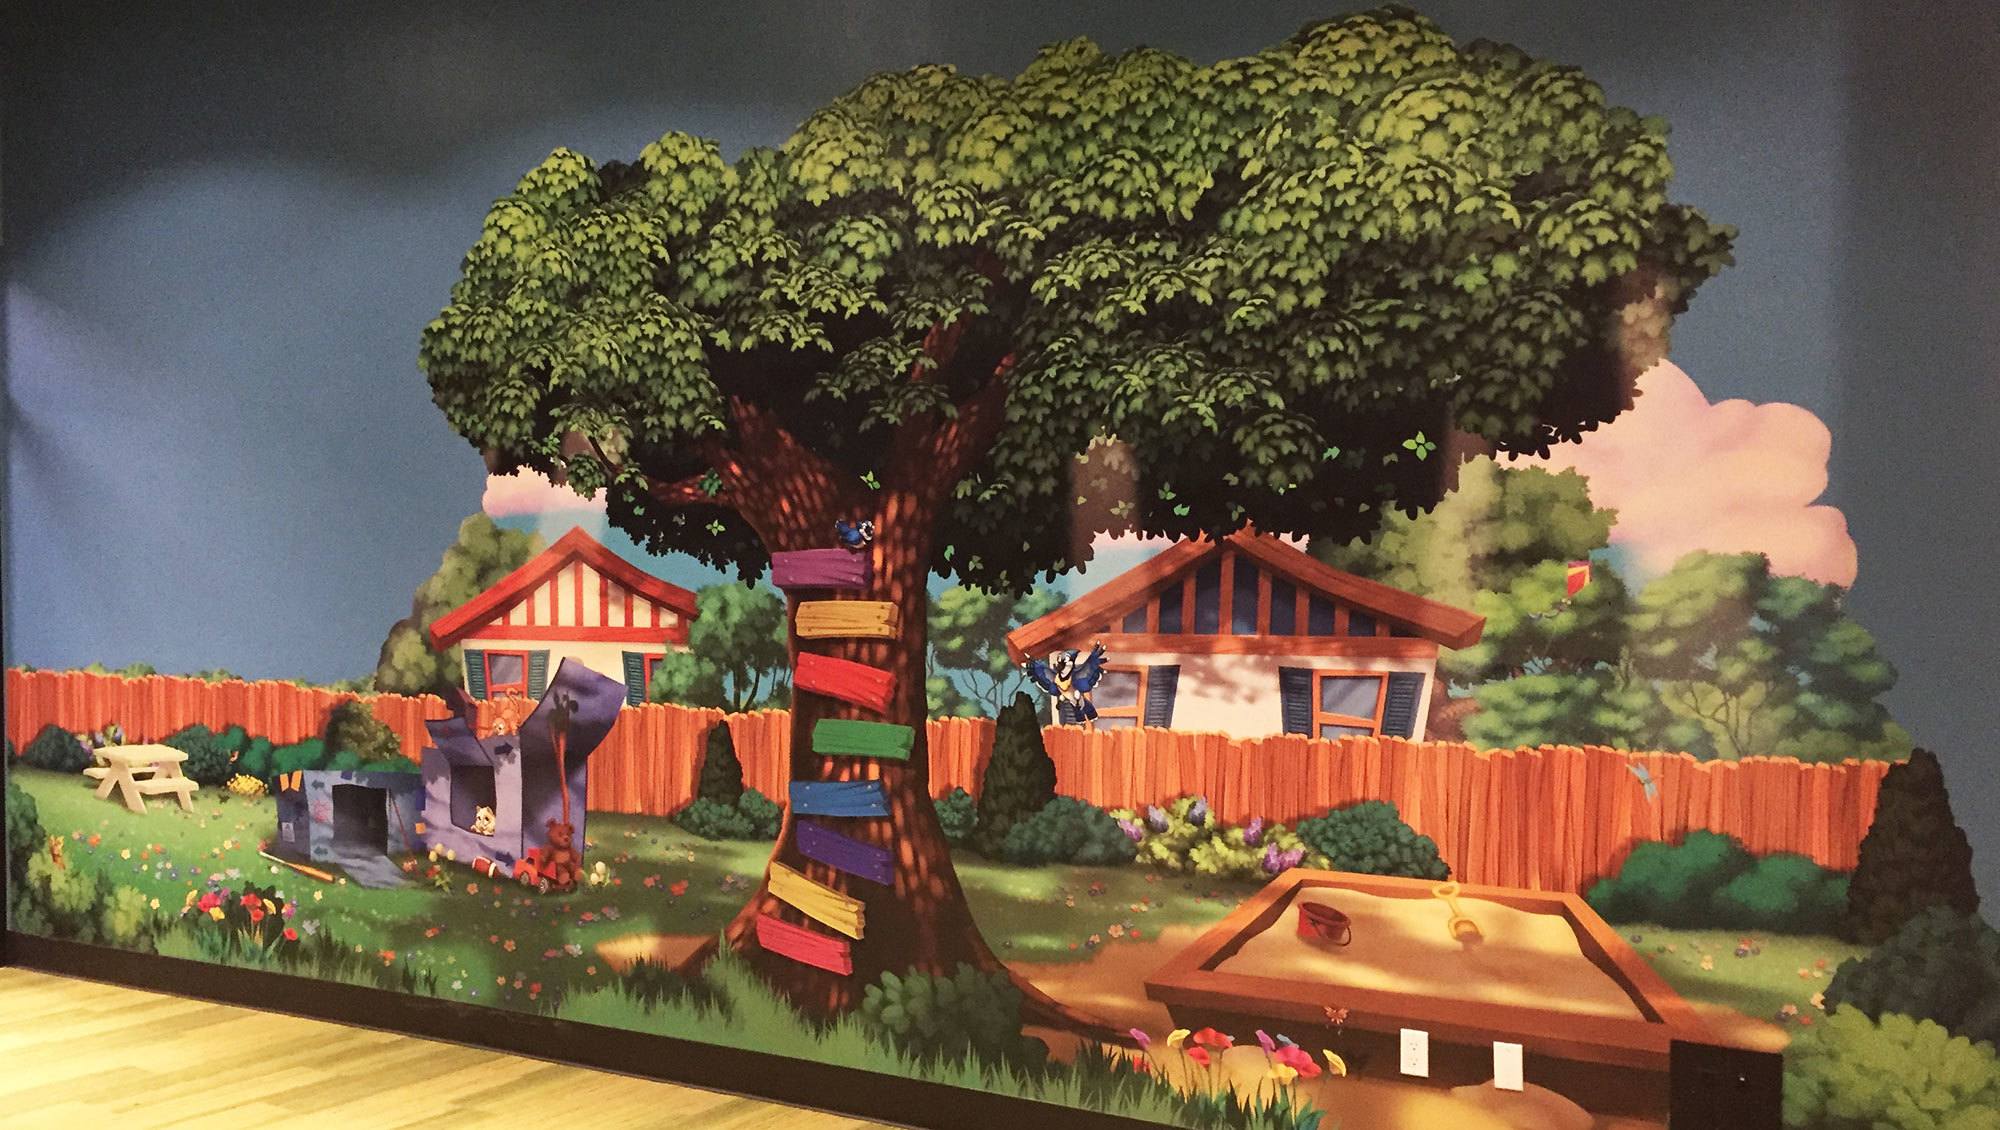 Neighborhood Themed Wall Covering with large tree, cardboard clubhouse, sandbox, wooden fence and 2 houses at Christ Fellowship Church